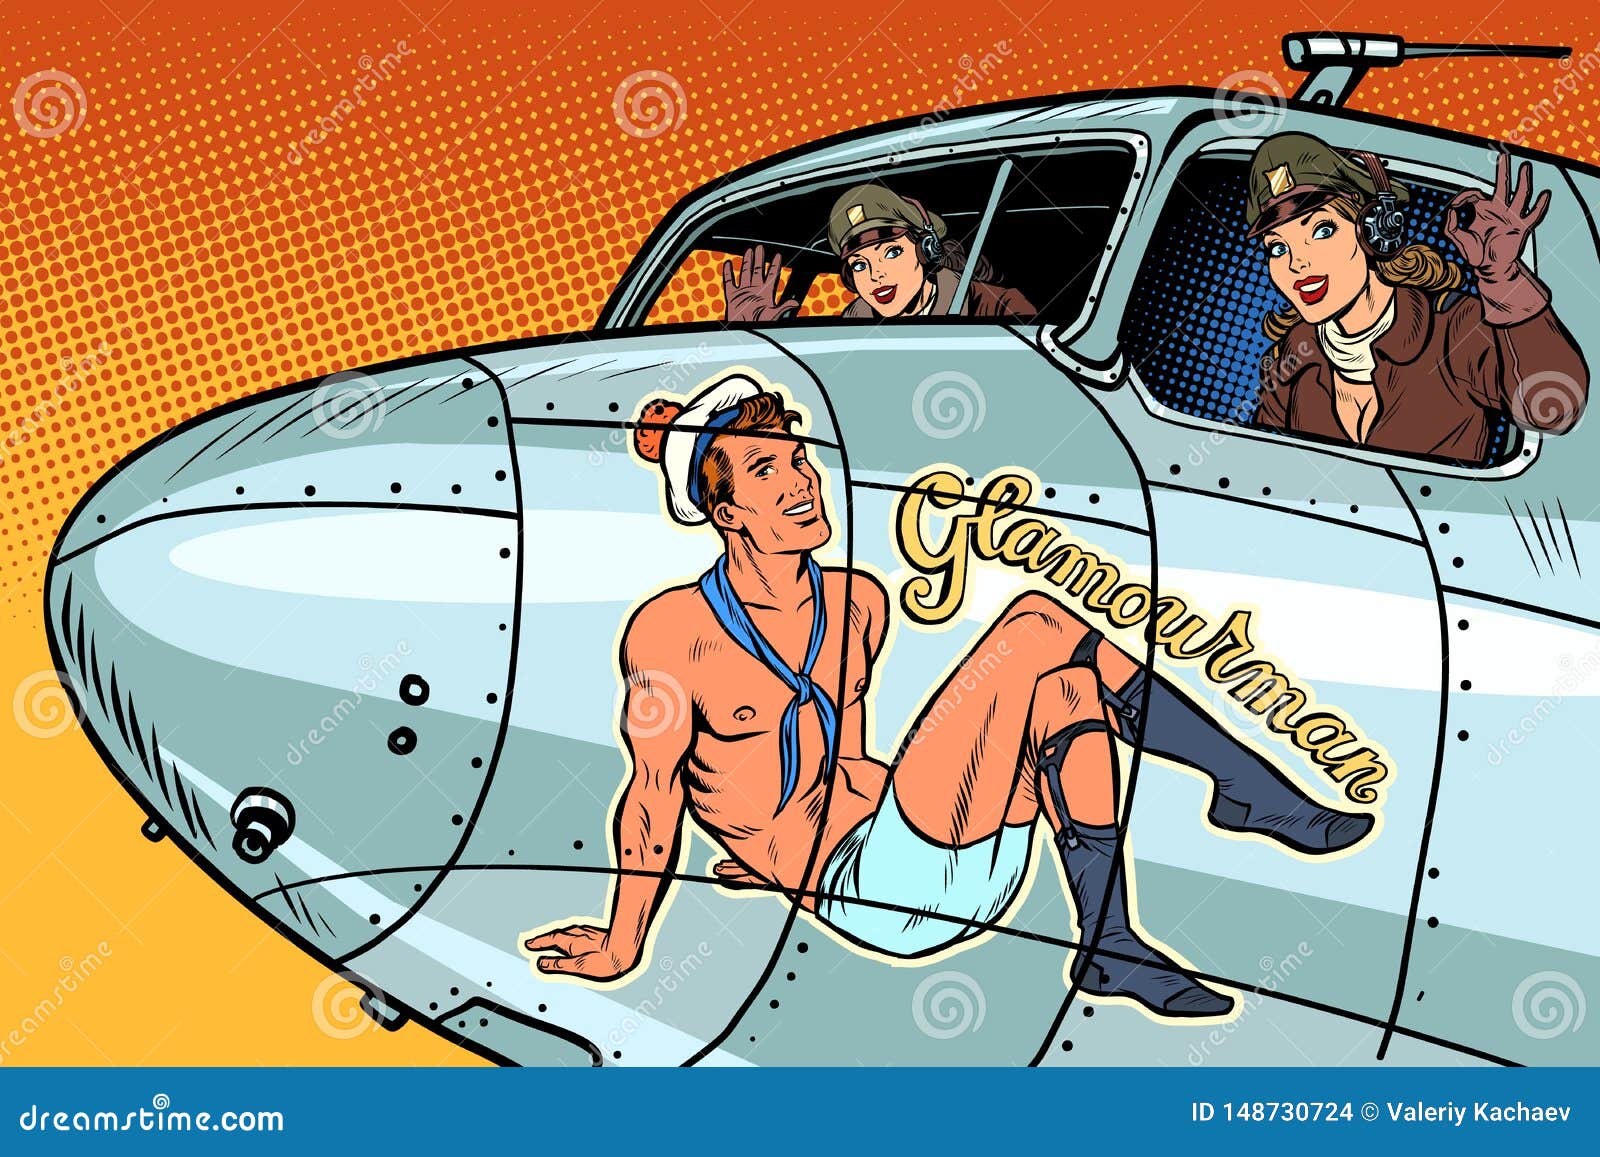 women pilots girls. pinup man on the fuselage of a retro bomber